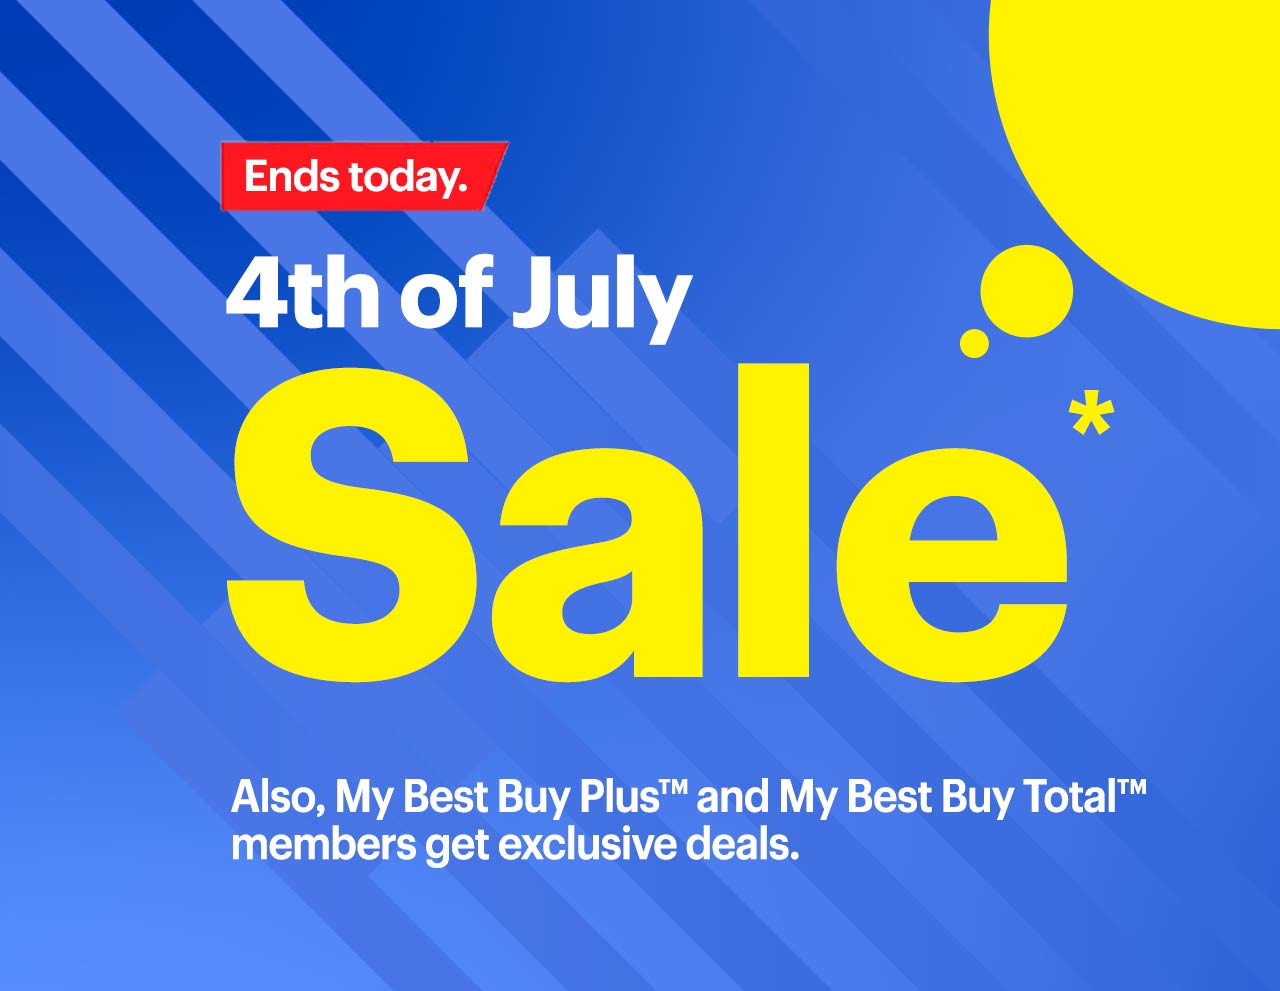 4th of July Sale ends today. Select members save more. Reference disclaimer.